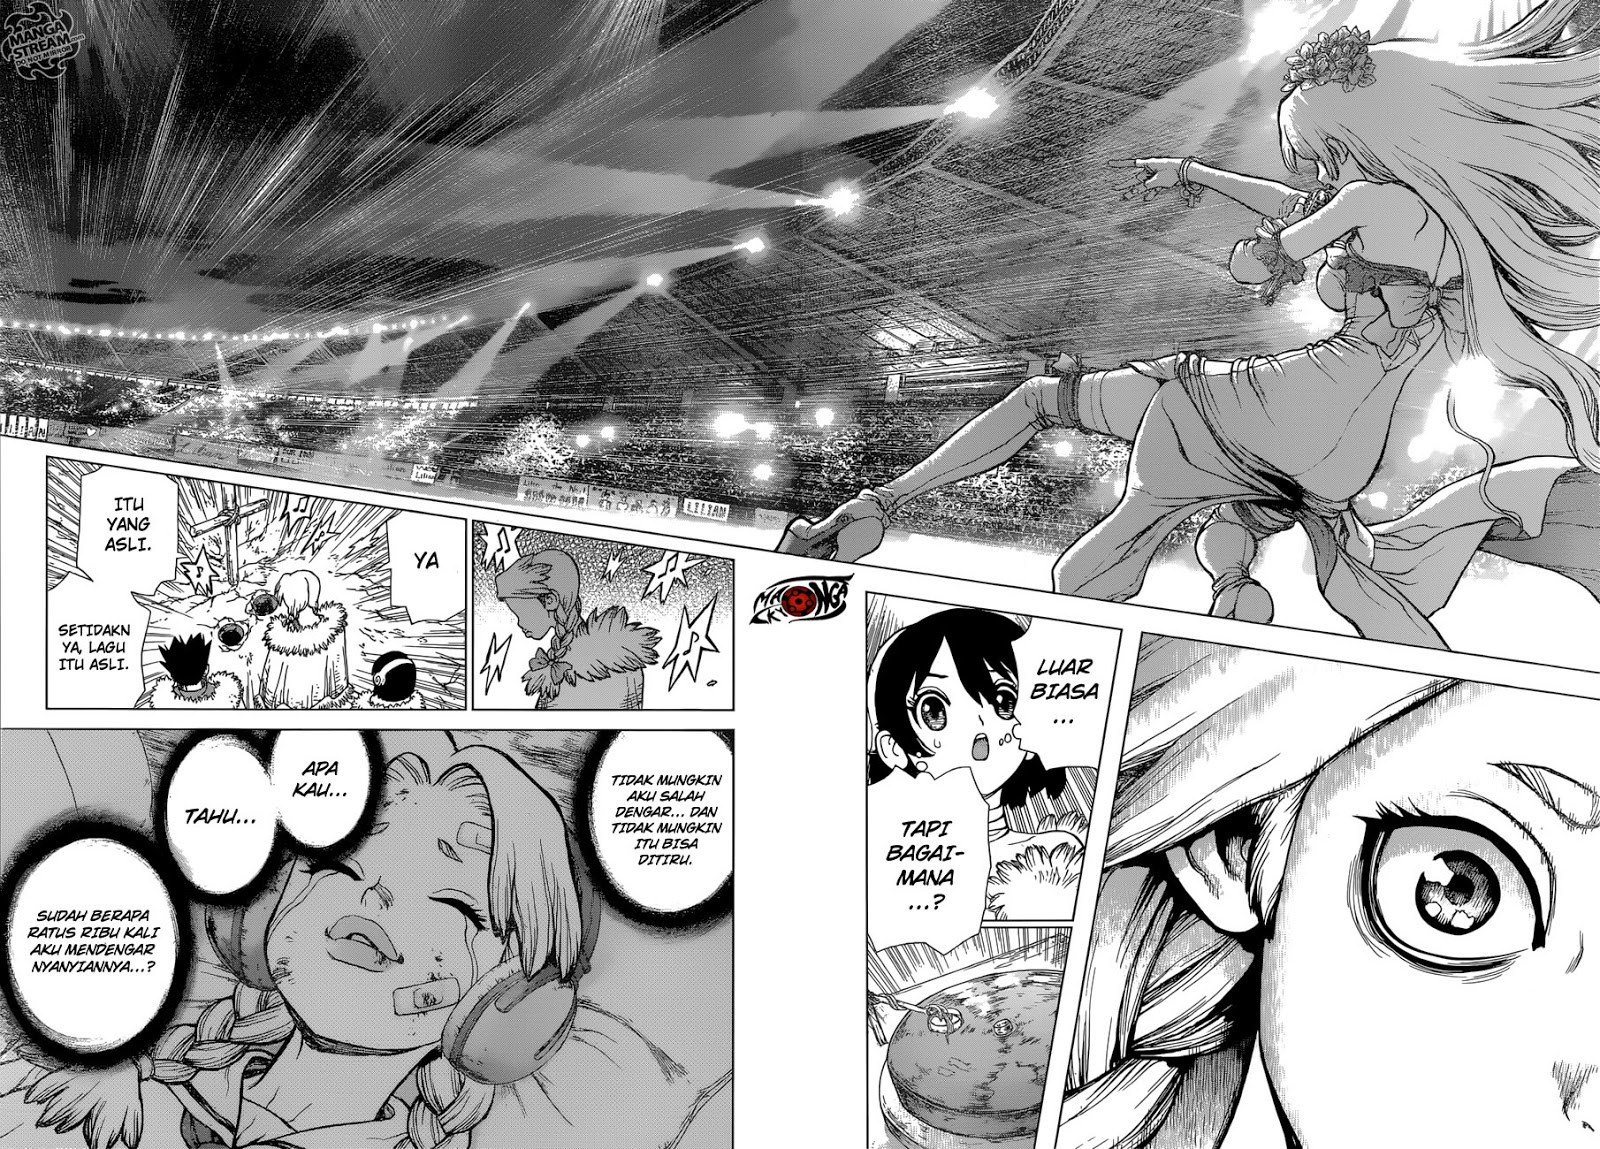 Dr Stone Chapter 66